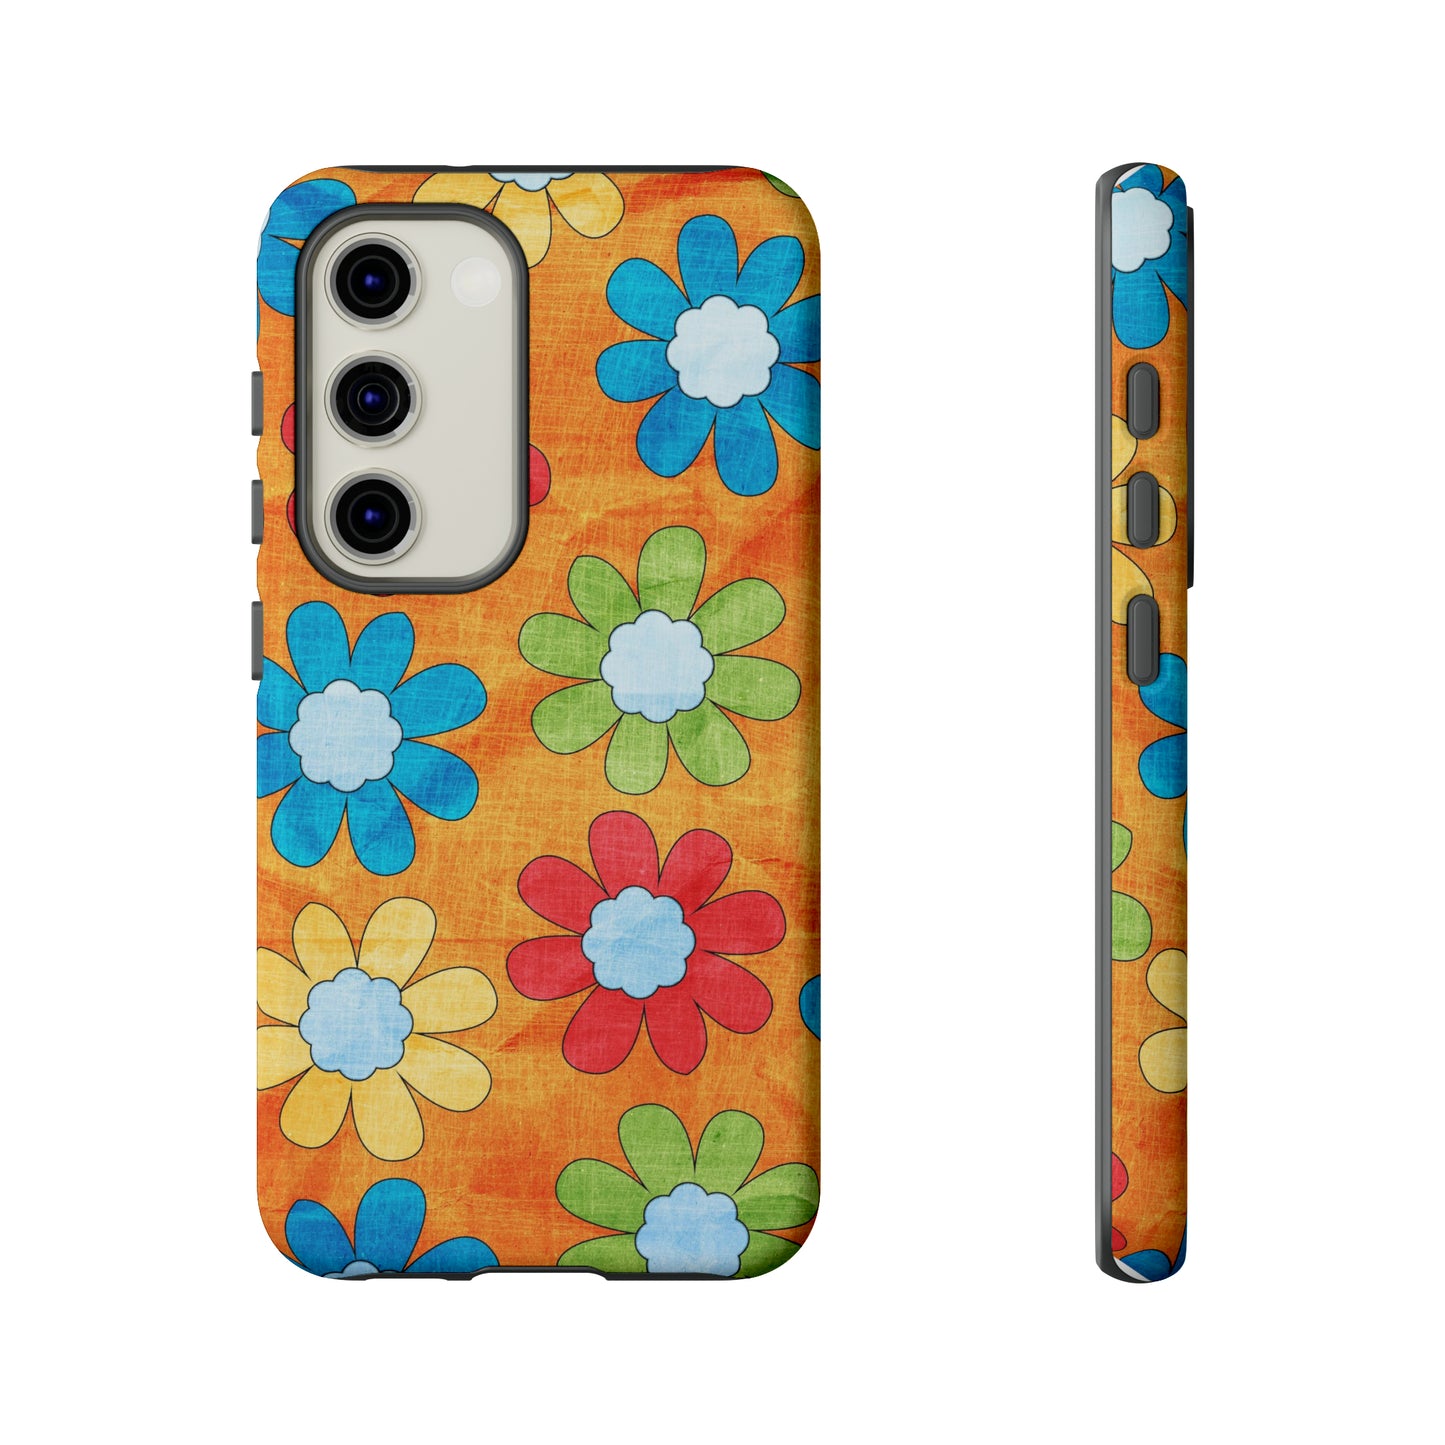 Retro Daisy Phone Case, Floral Flower Cell Phone Case, Cute iPhone Case